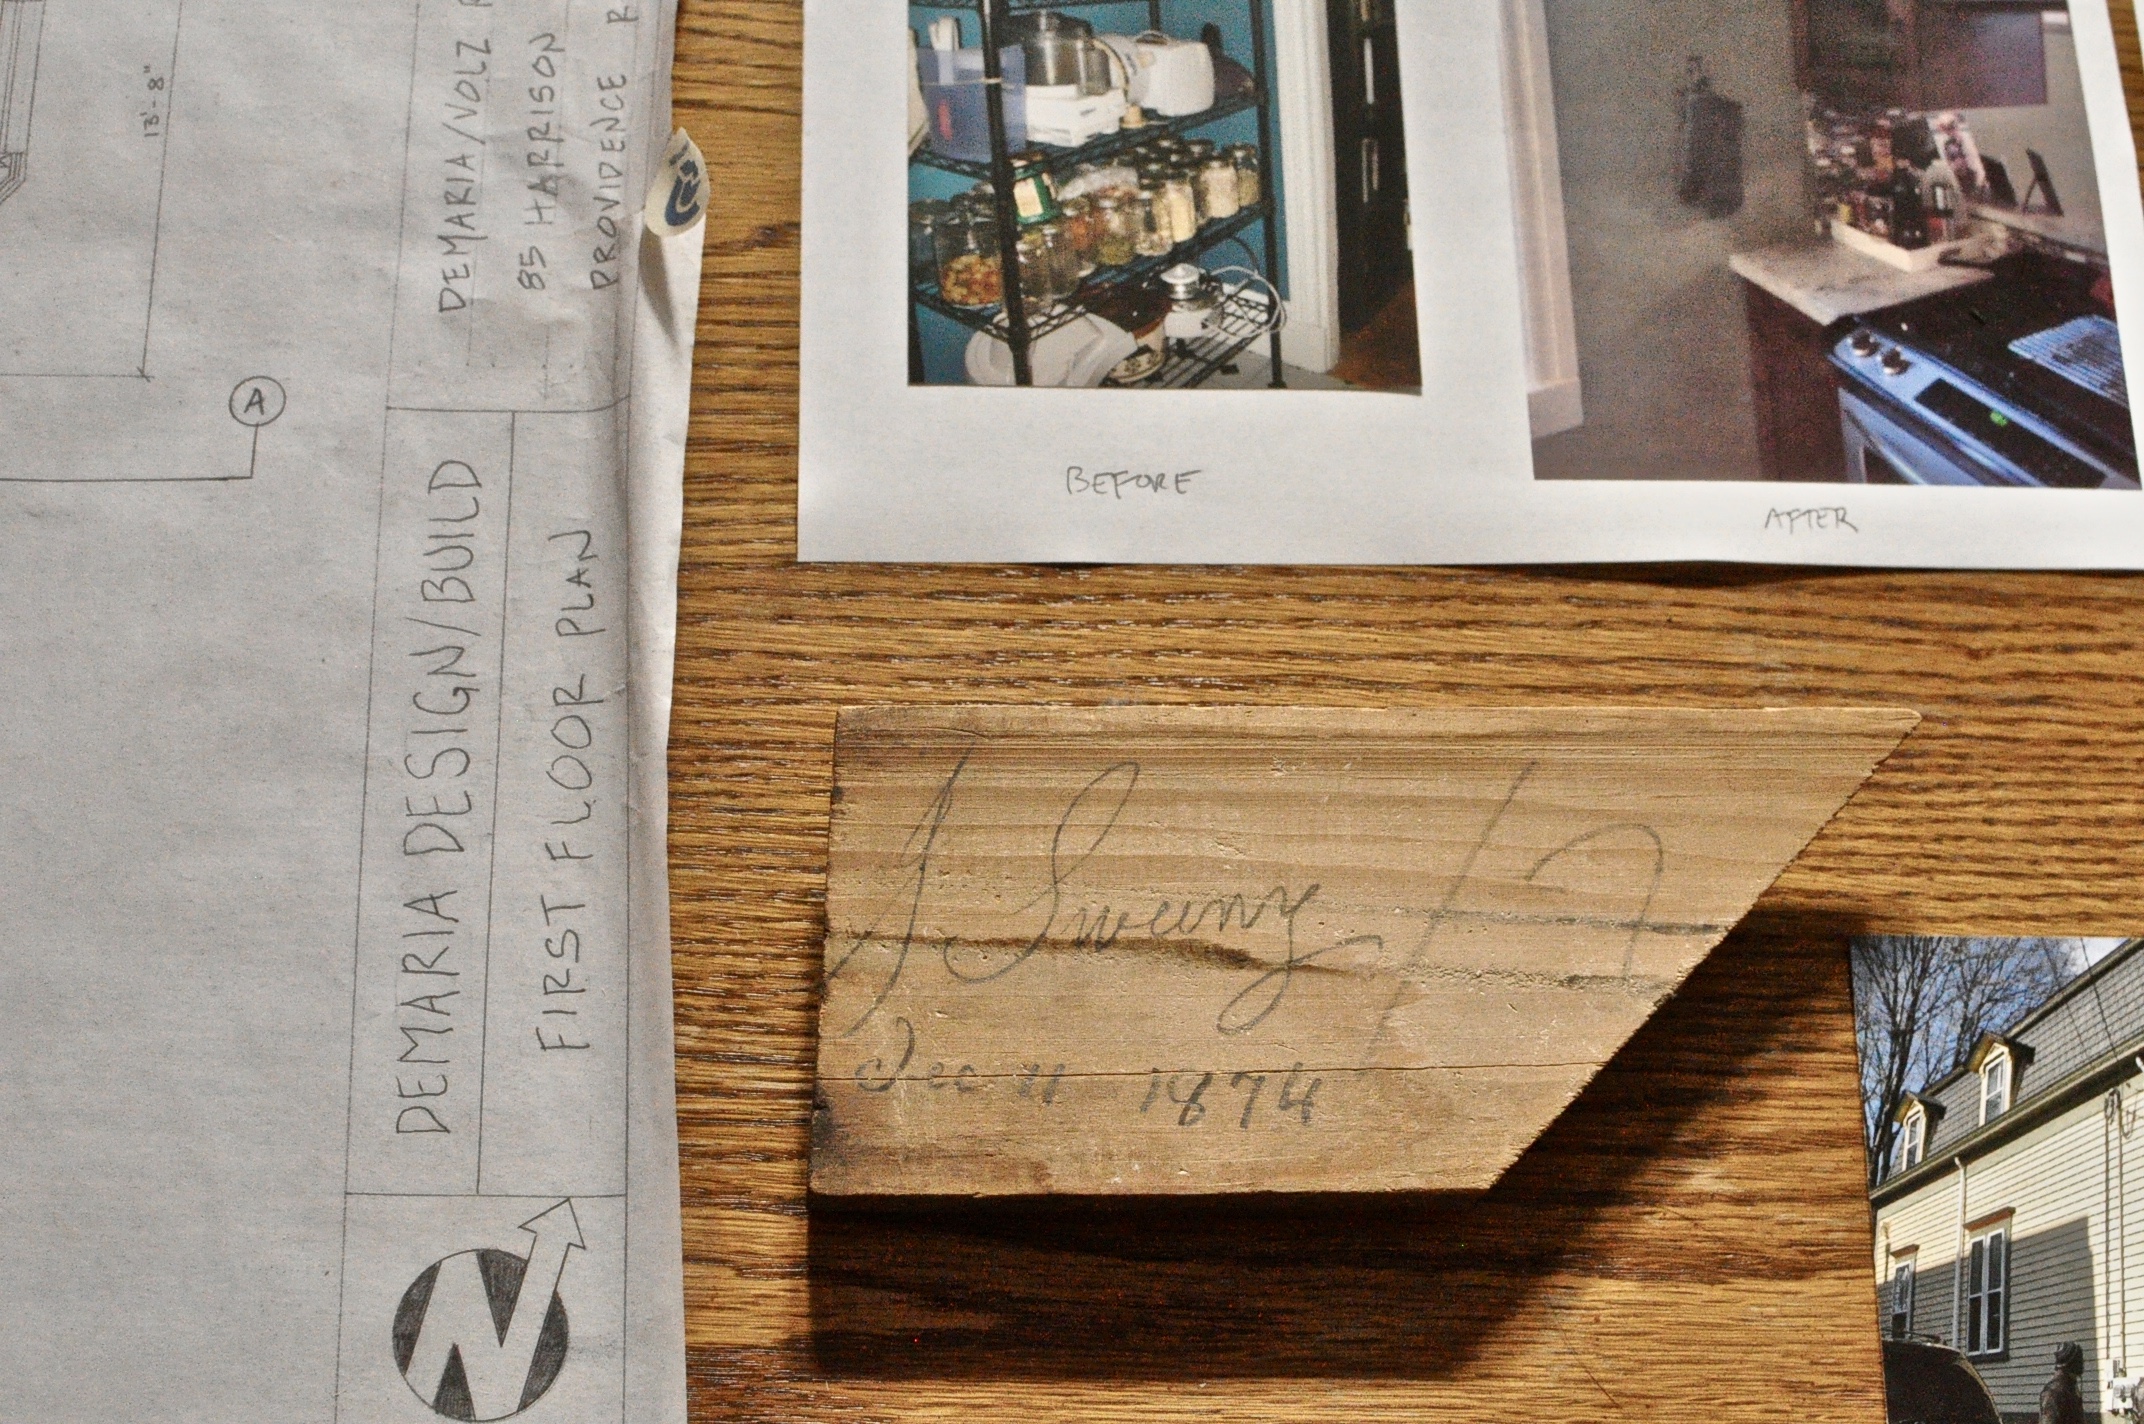  Piece of trim found in a wall on Harrison Street, dated 1874 and signed “J. Sweeney” Photo by Barbra Revill 